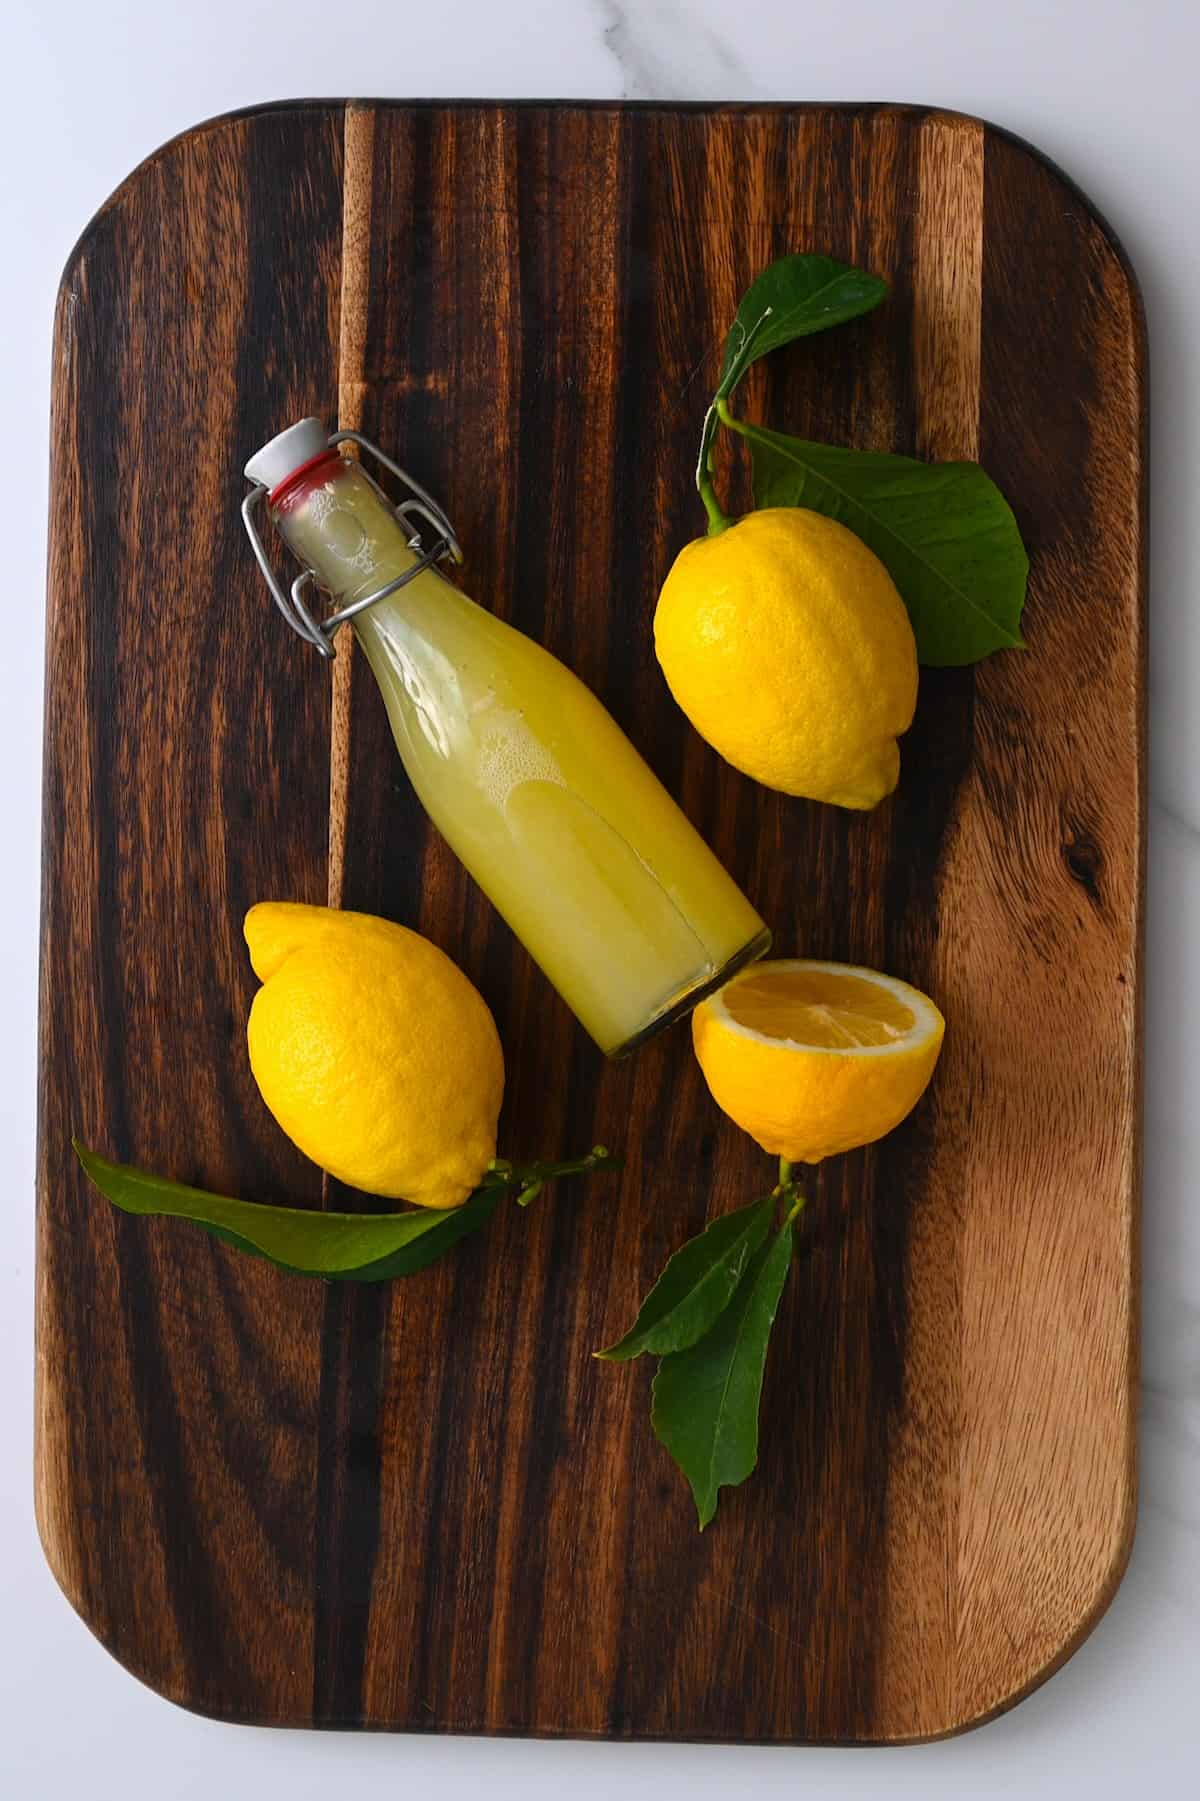 A small bottle with lemon juice and two and a half lemons